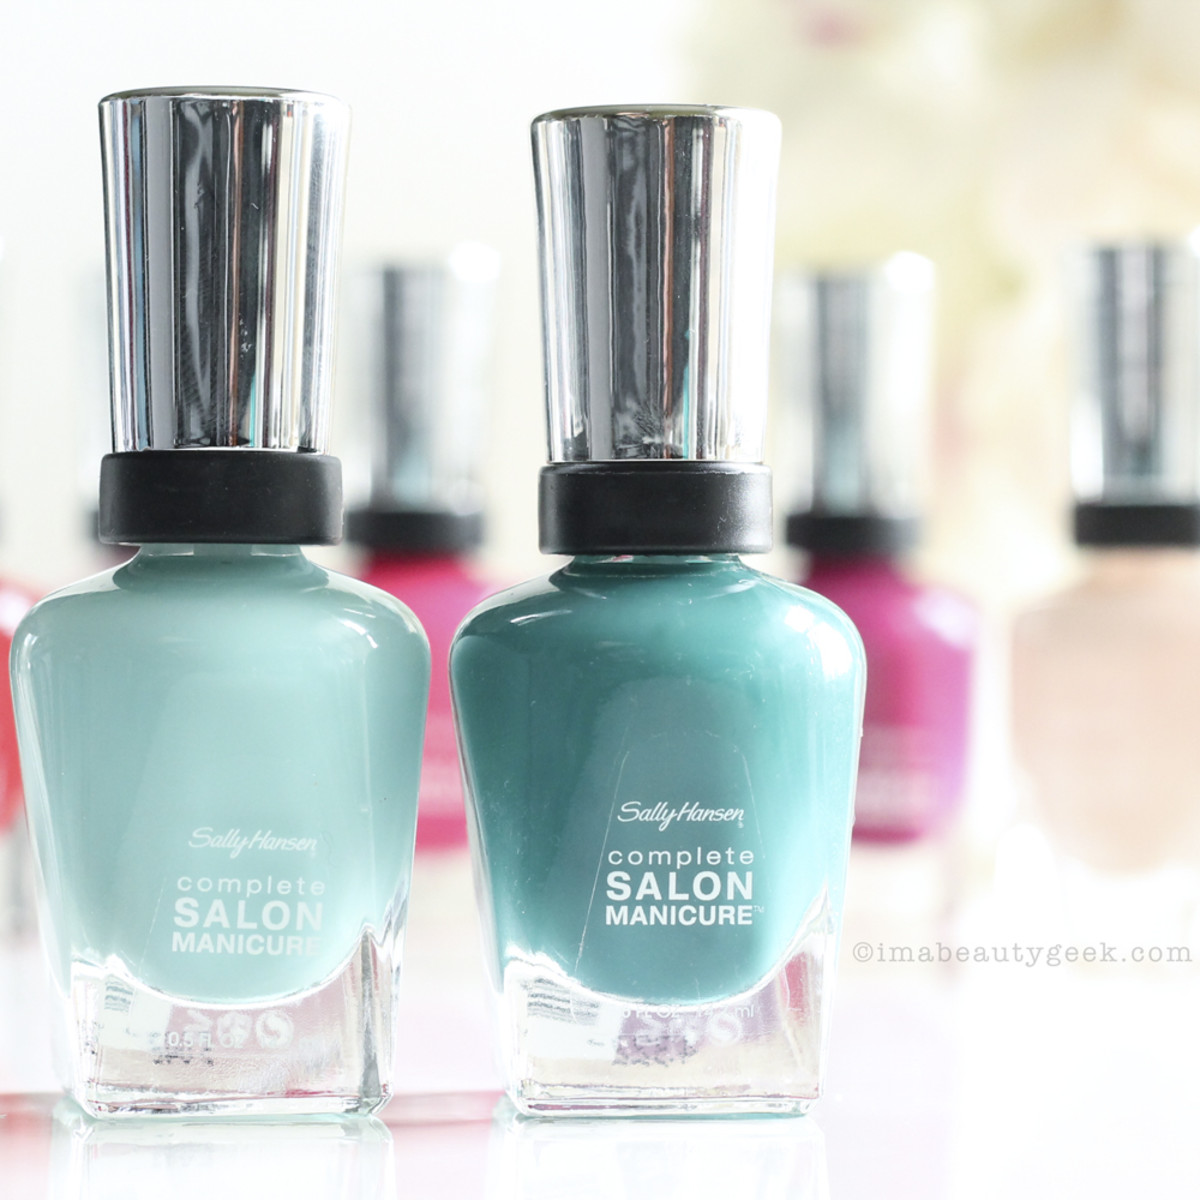 Sally Hansen Complete Salon Manicure in Jaded and Greenlight